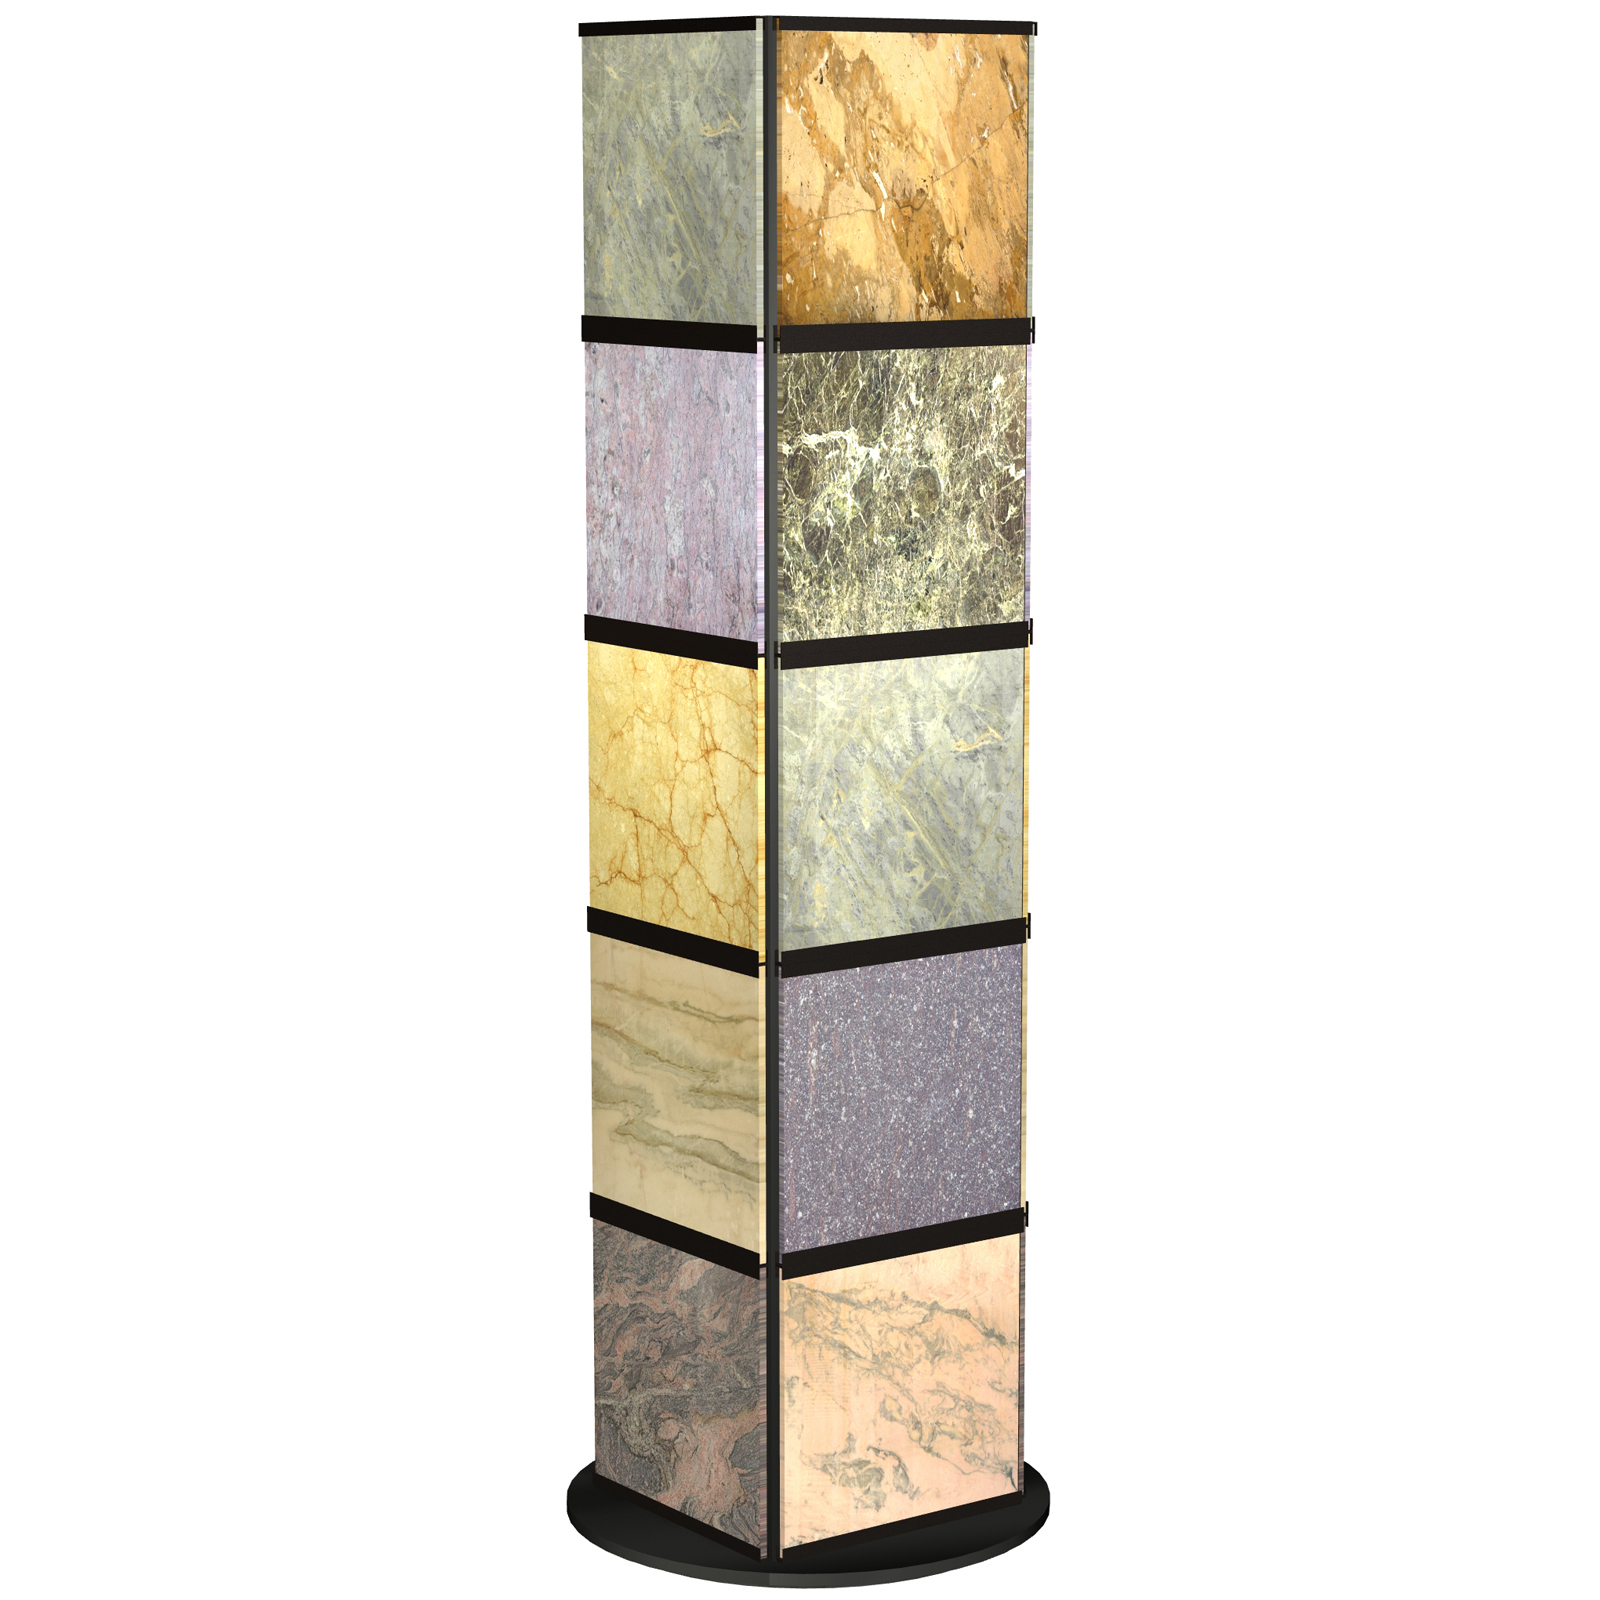 Versatile CD10 Rotating Tower Displays Ceramic Tile Stone Marble Samples with Great Visibility